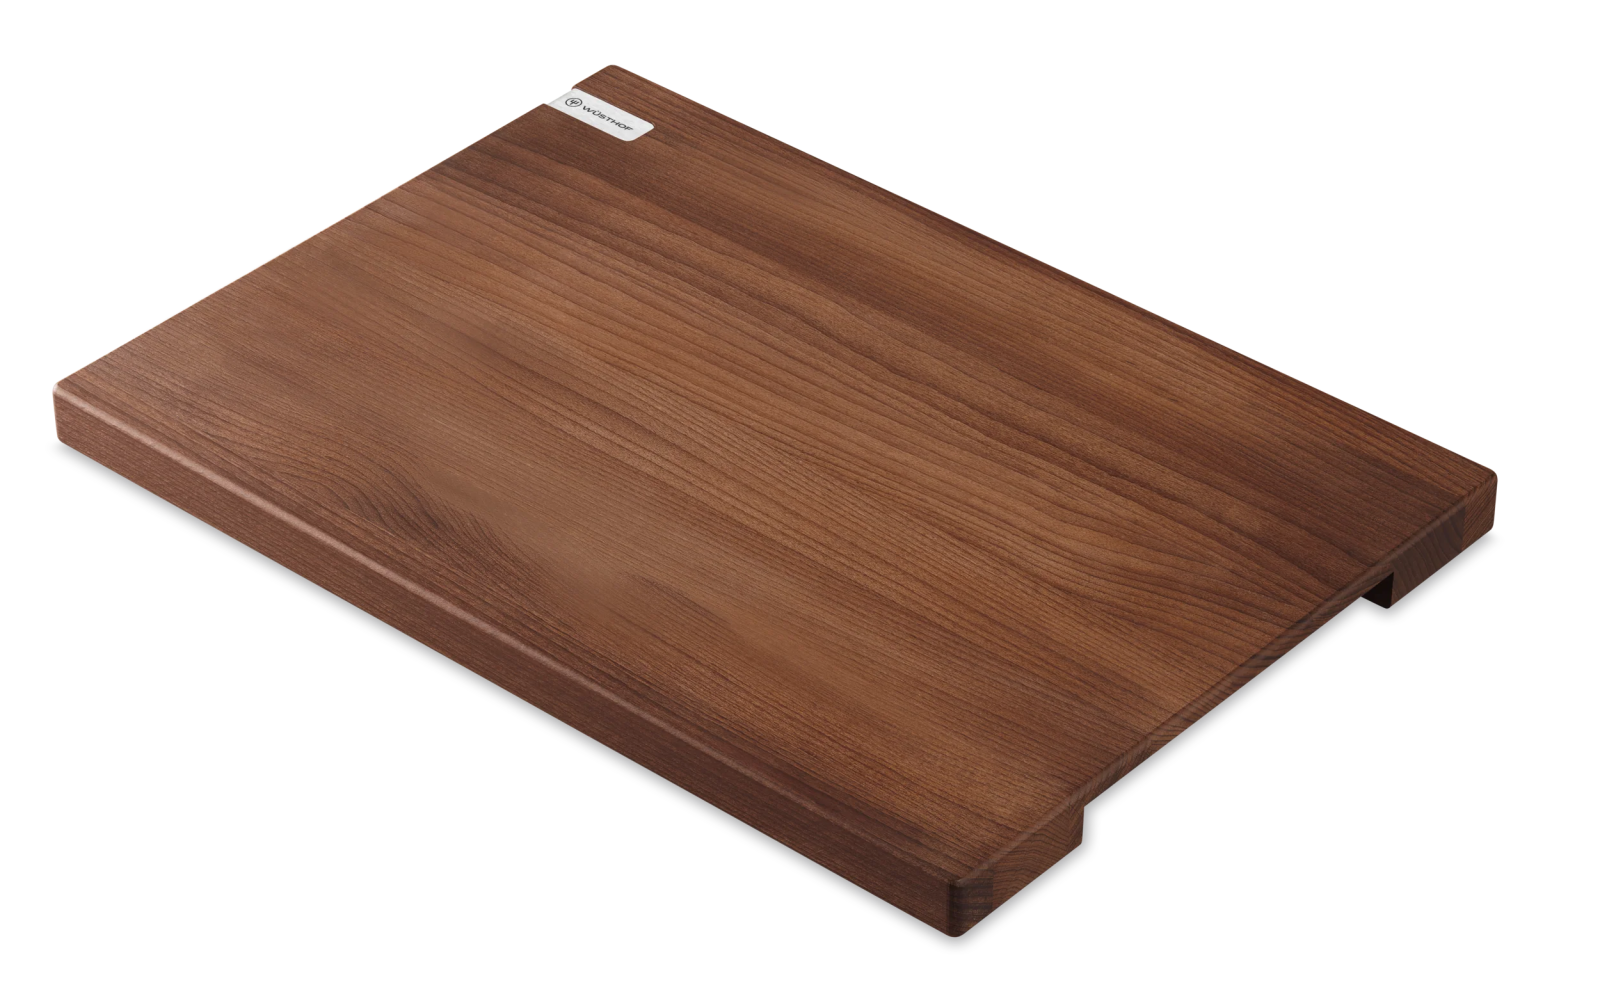 Wusthof Thermo Beech Cutting Board 50cm x 35cm - WT4159800205 - The Cotswold Knife Company